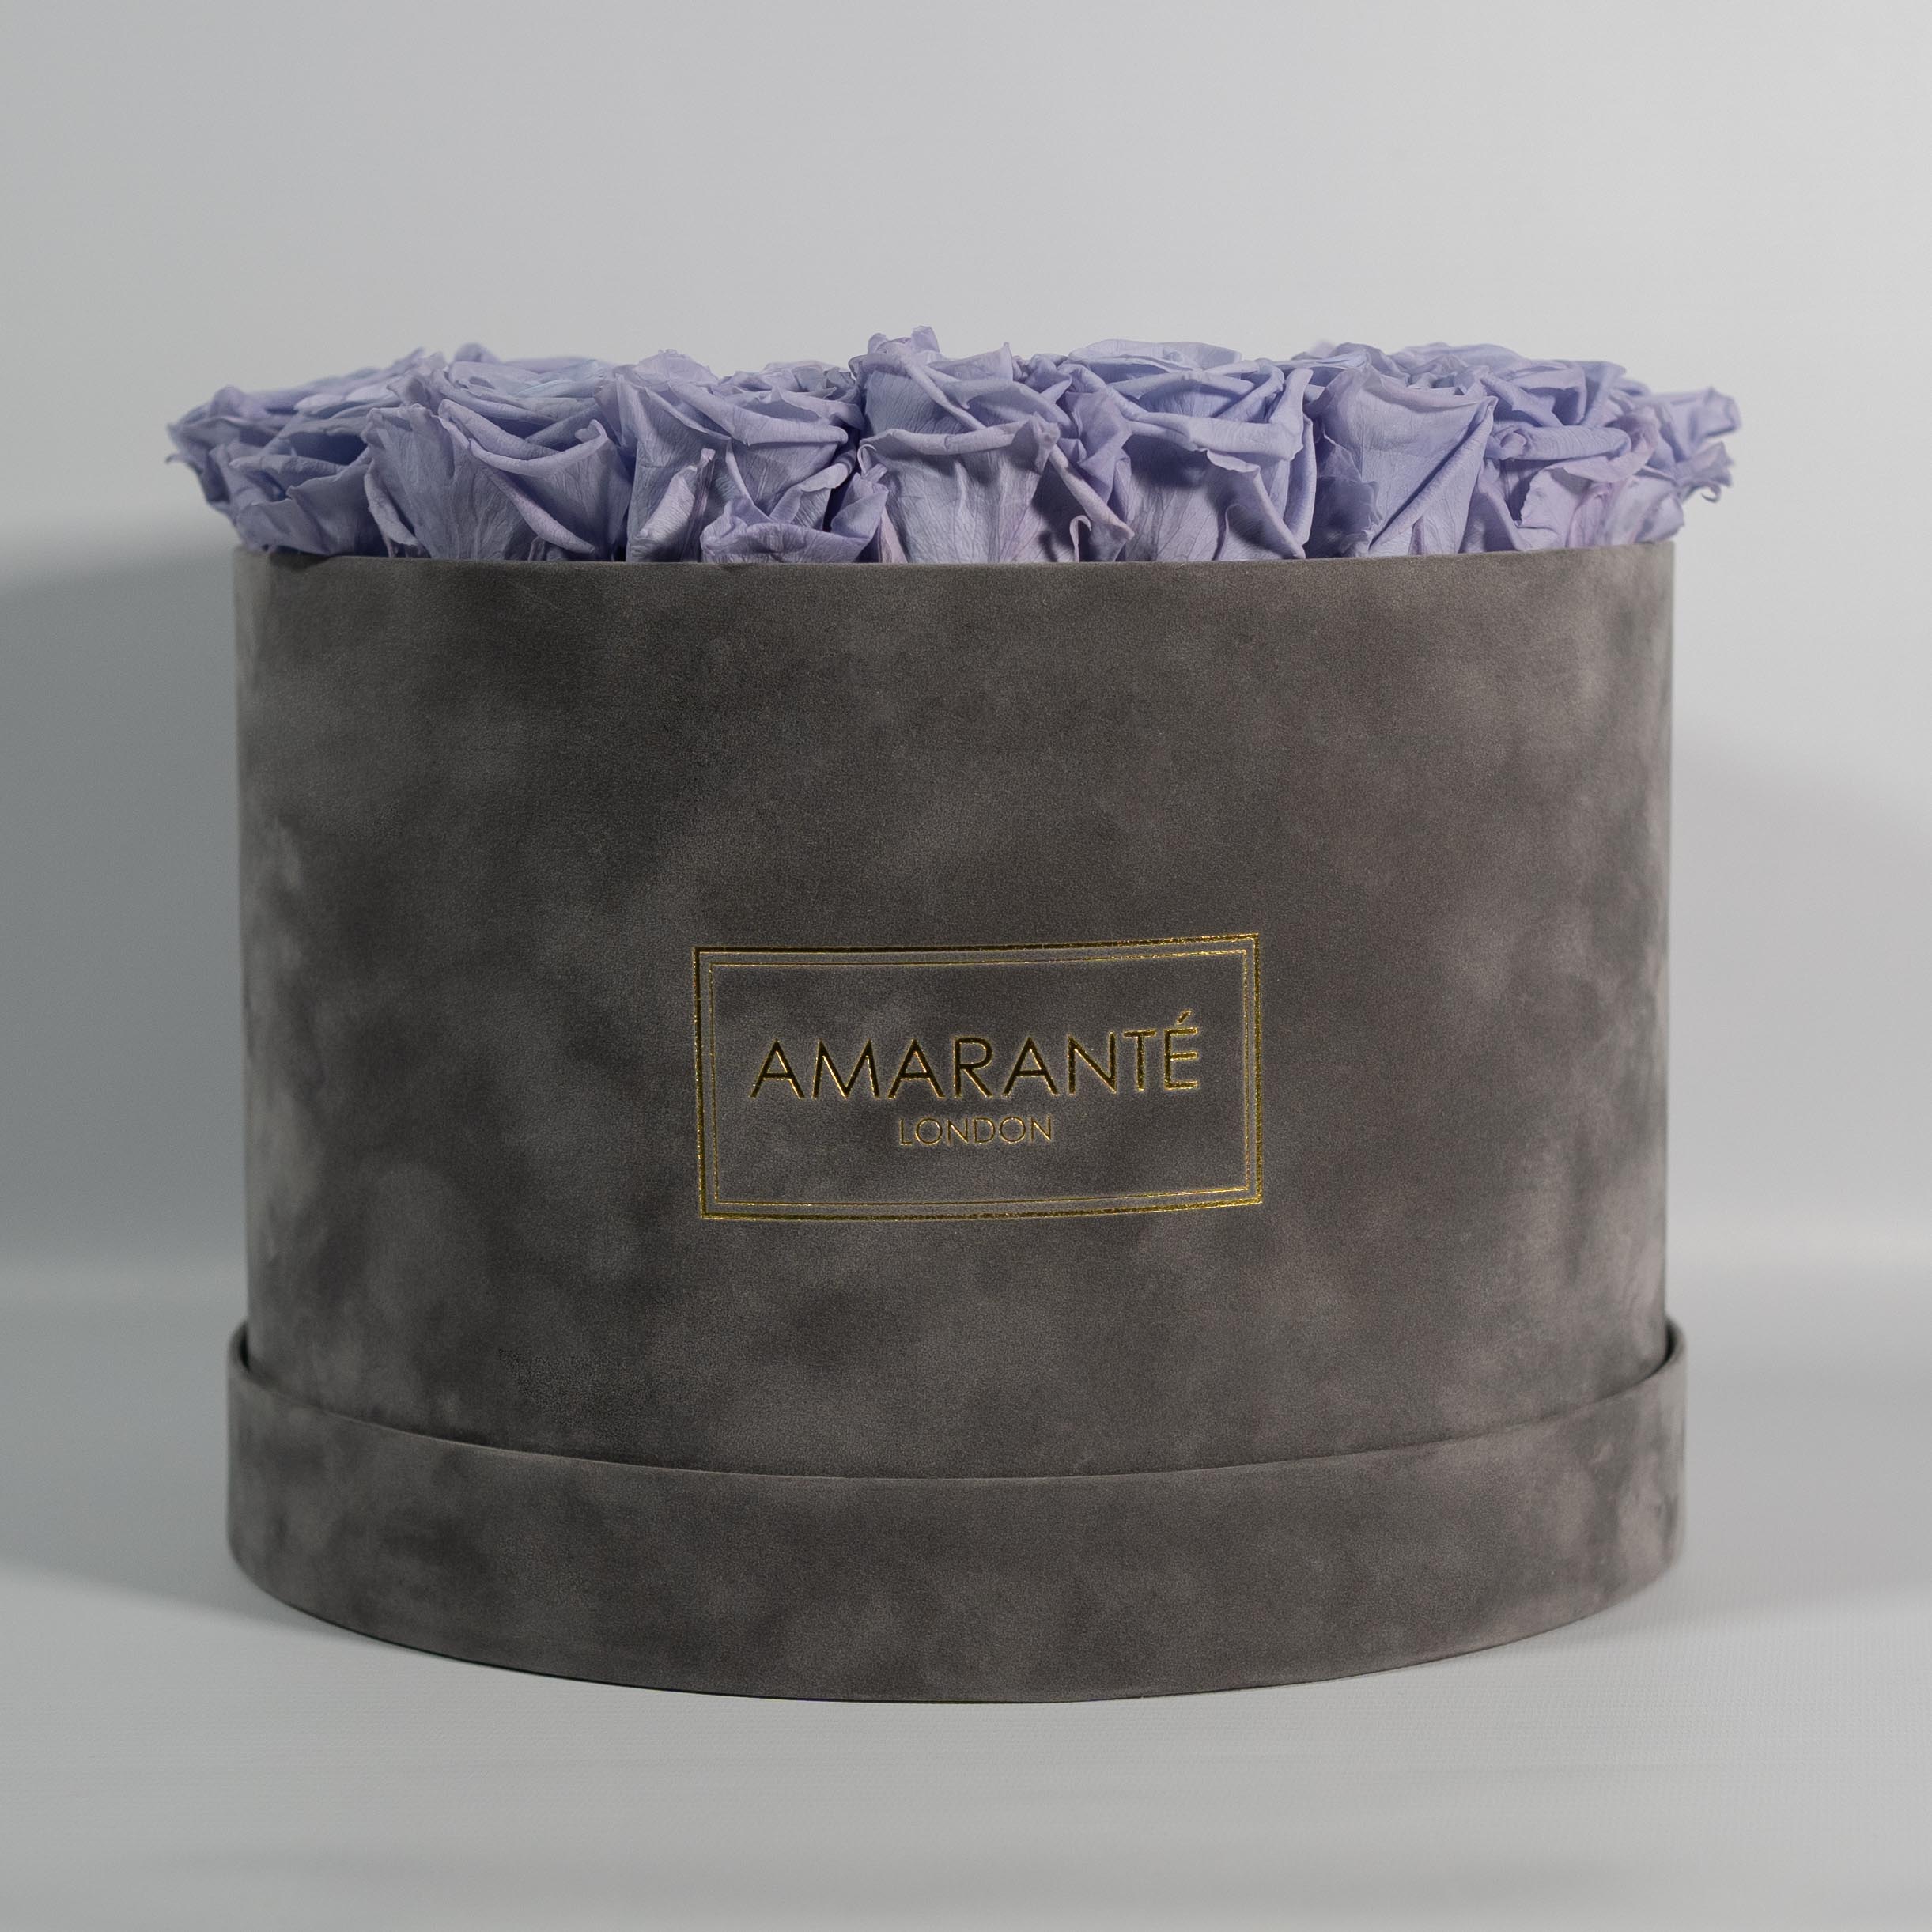 Spring-time inspired Lavender Roses imbedded in a stunning grey package. 